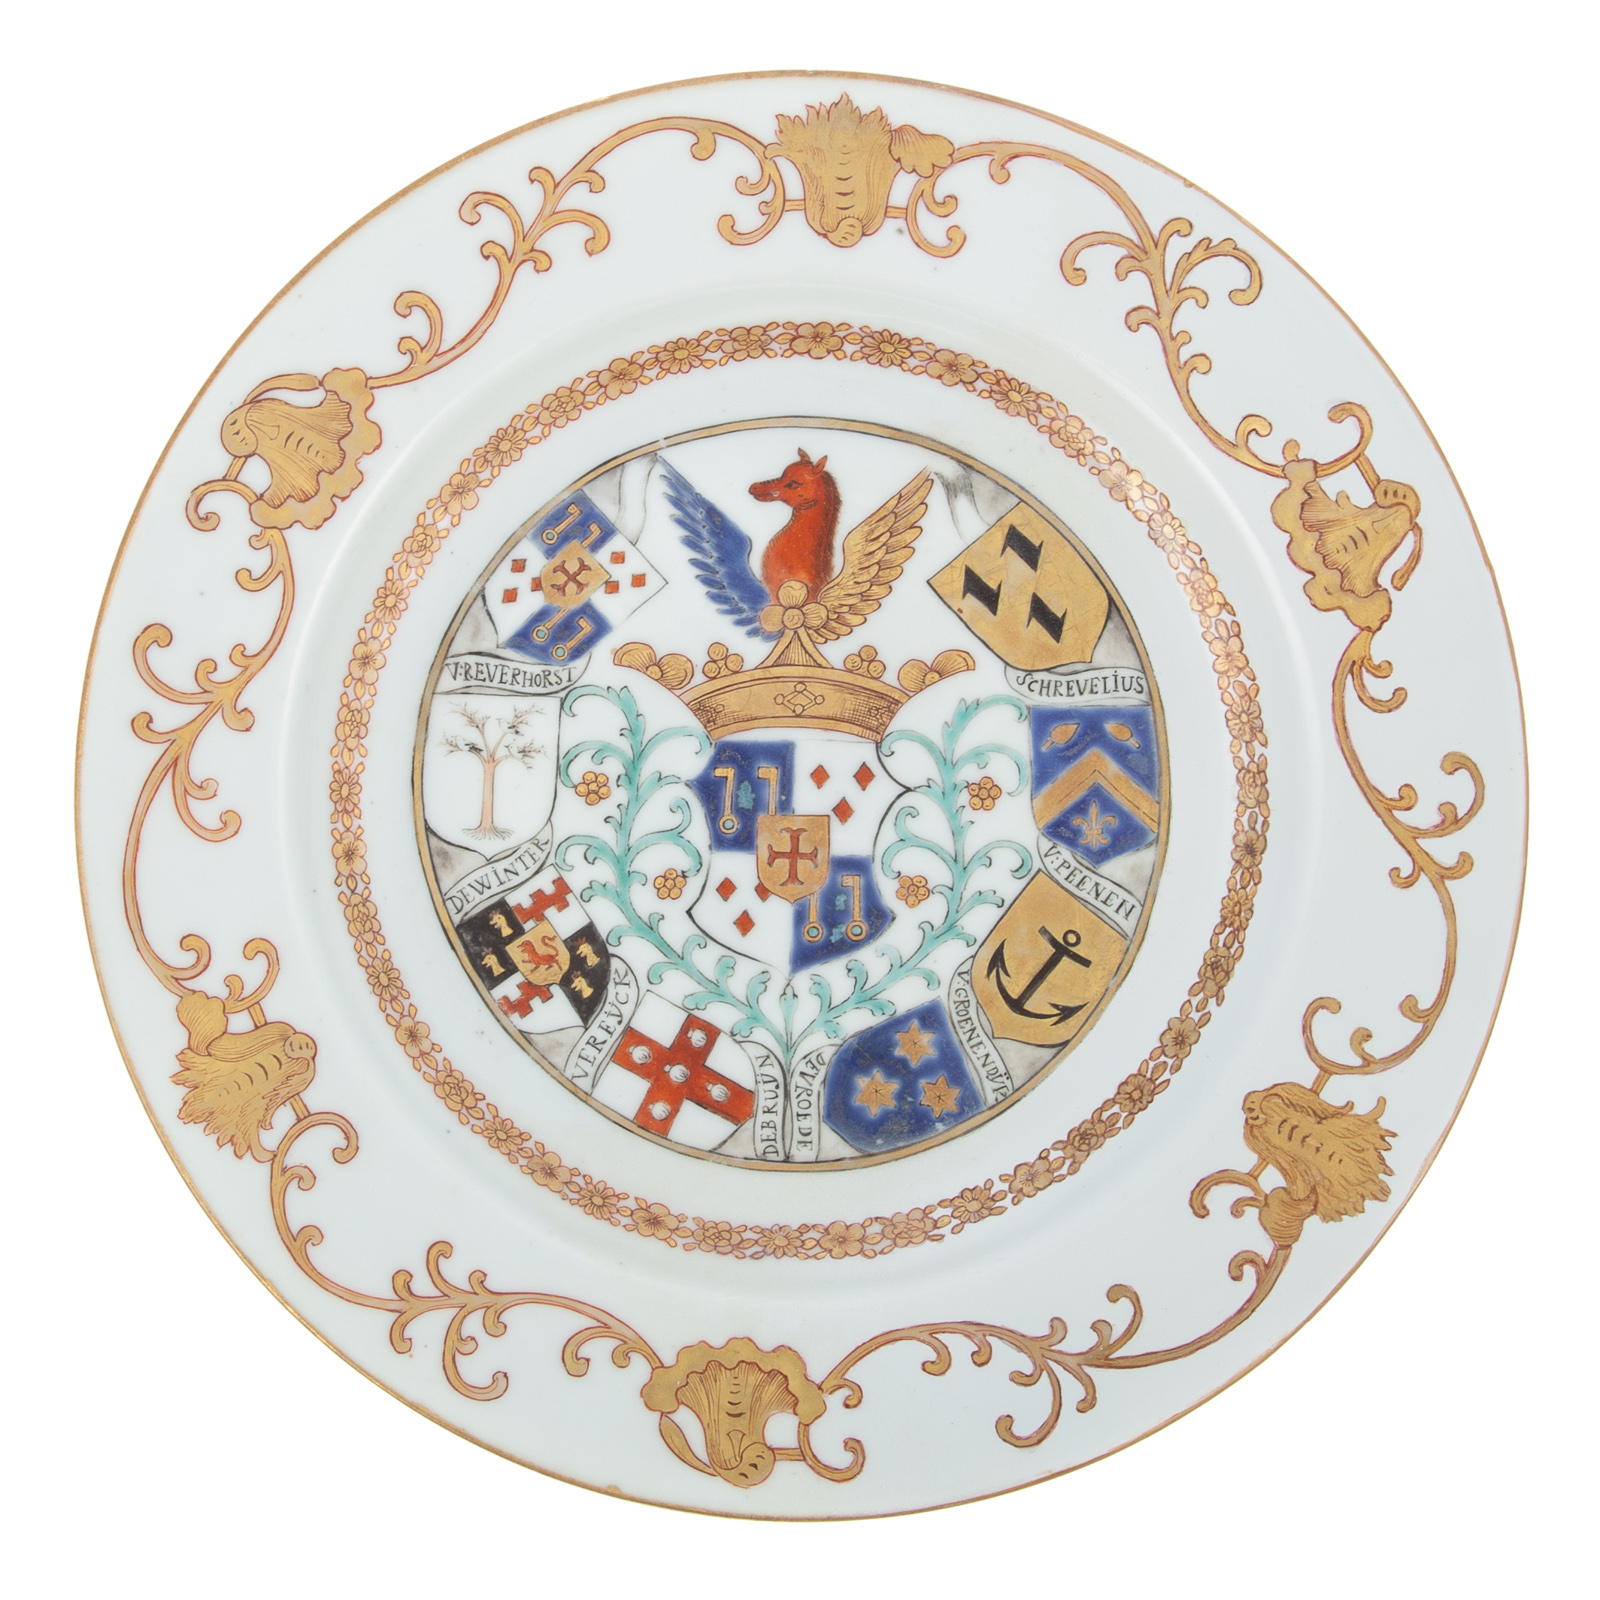 DUTCH MARKET CHINESE EXPORT ARMORIAL 36aad7